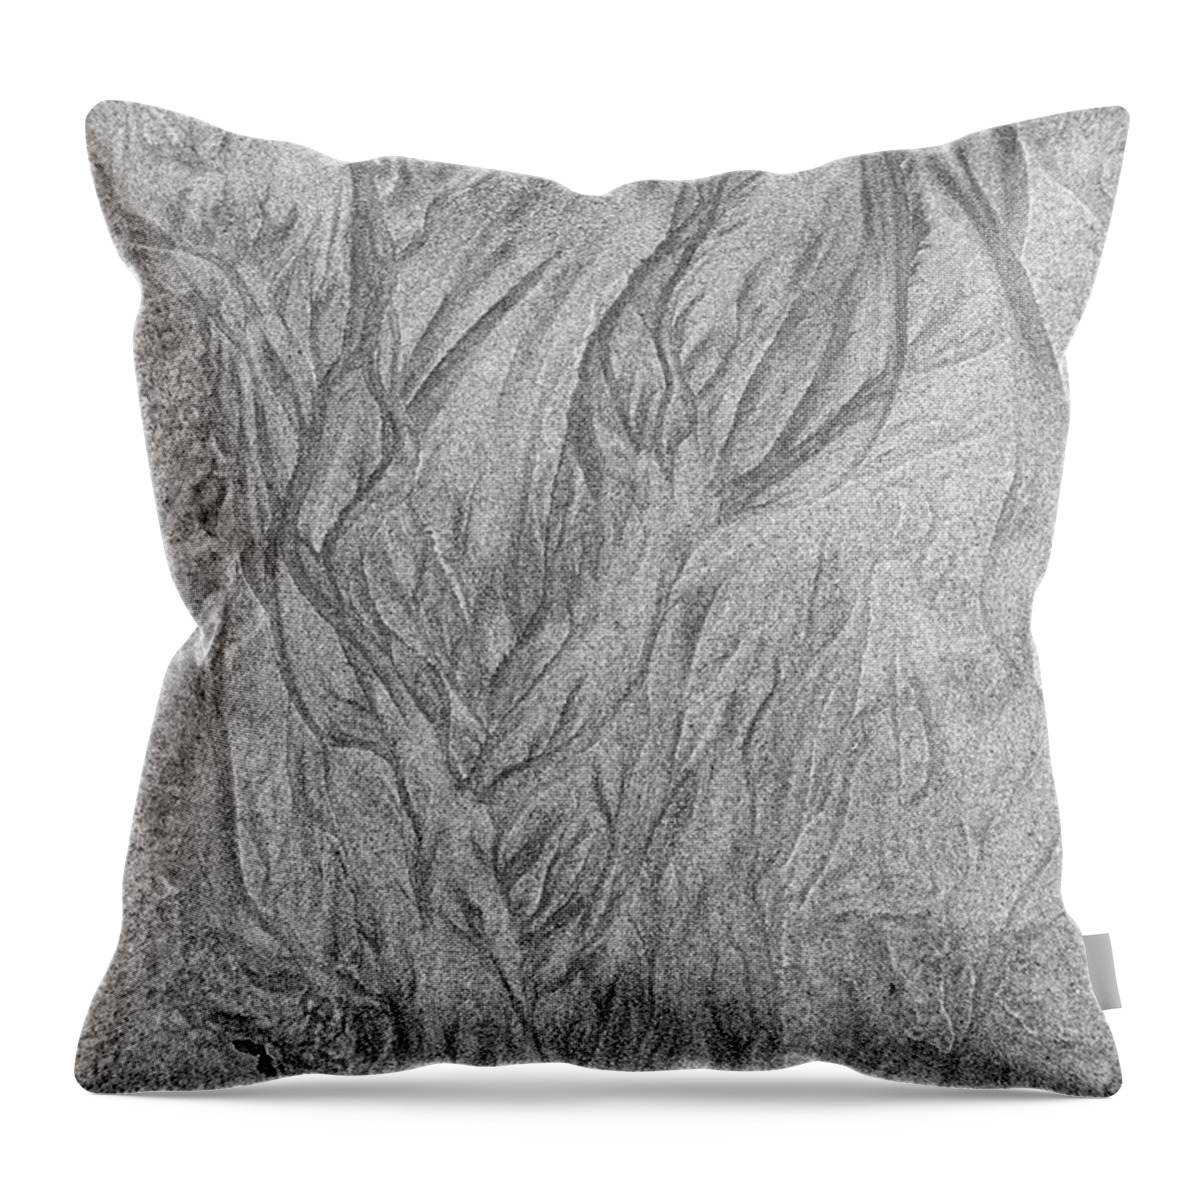 Abstract Throw Pillow featuring the photograph Patterns left by the receding water in the sand of a beach - monochrome by Intensivelight